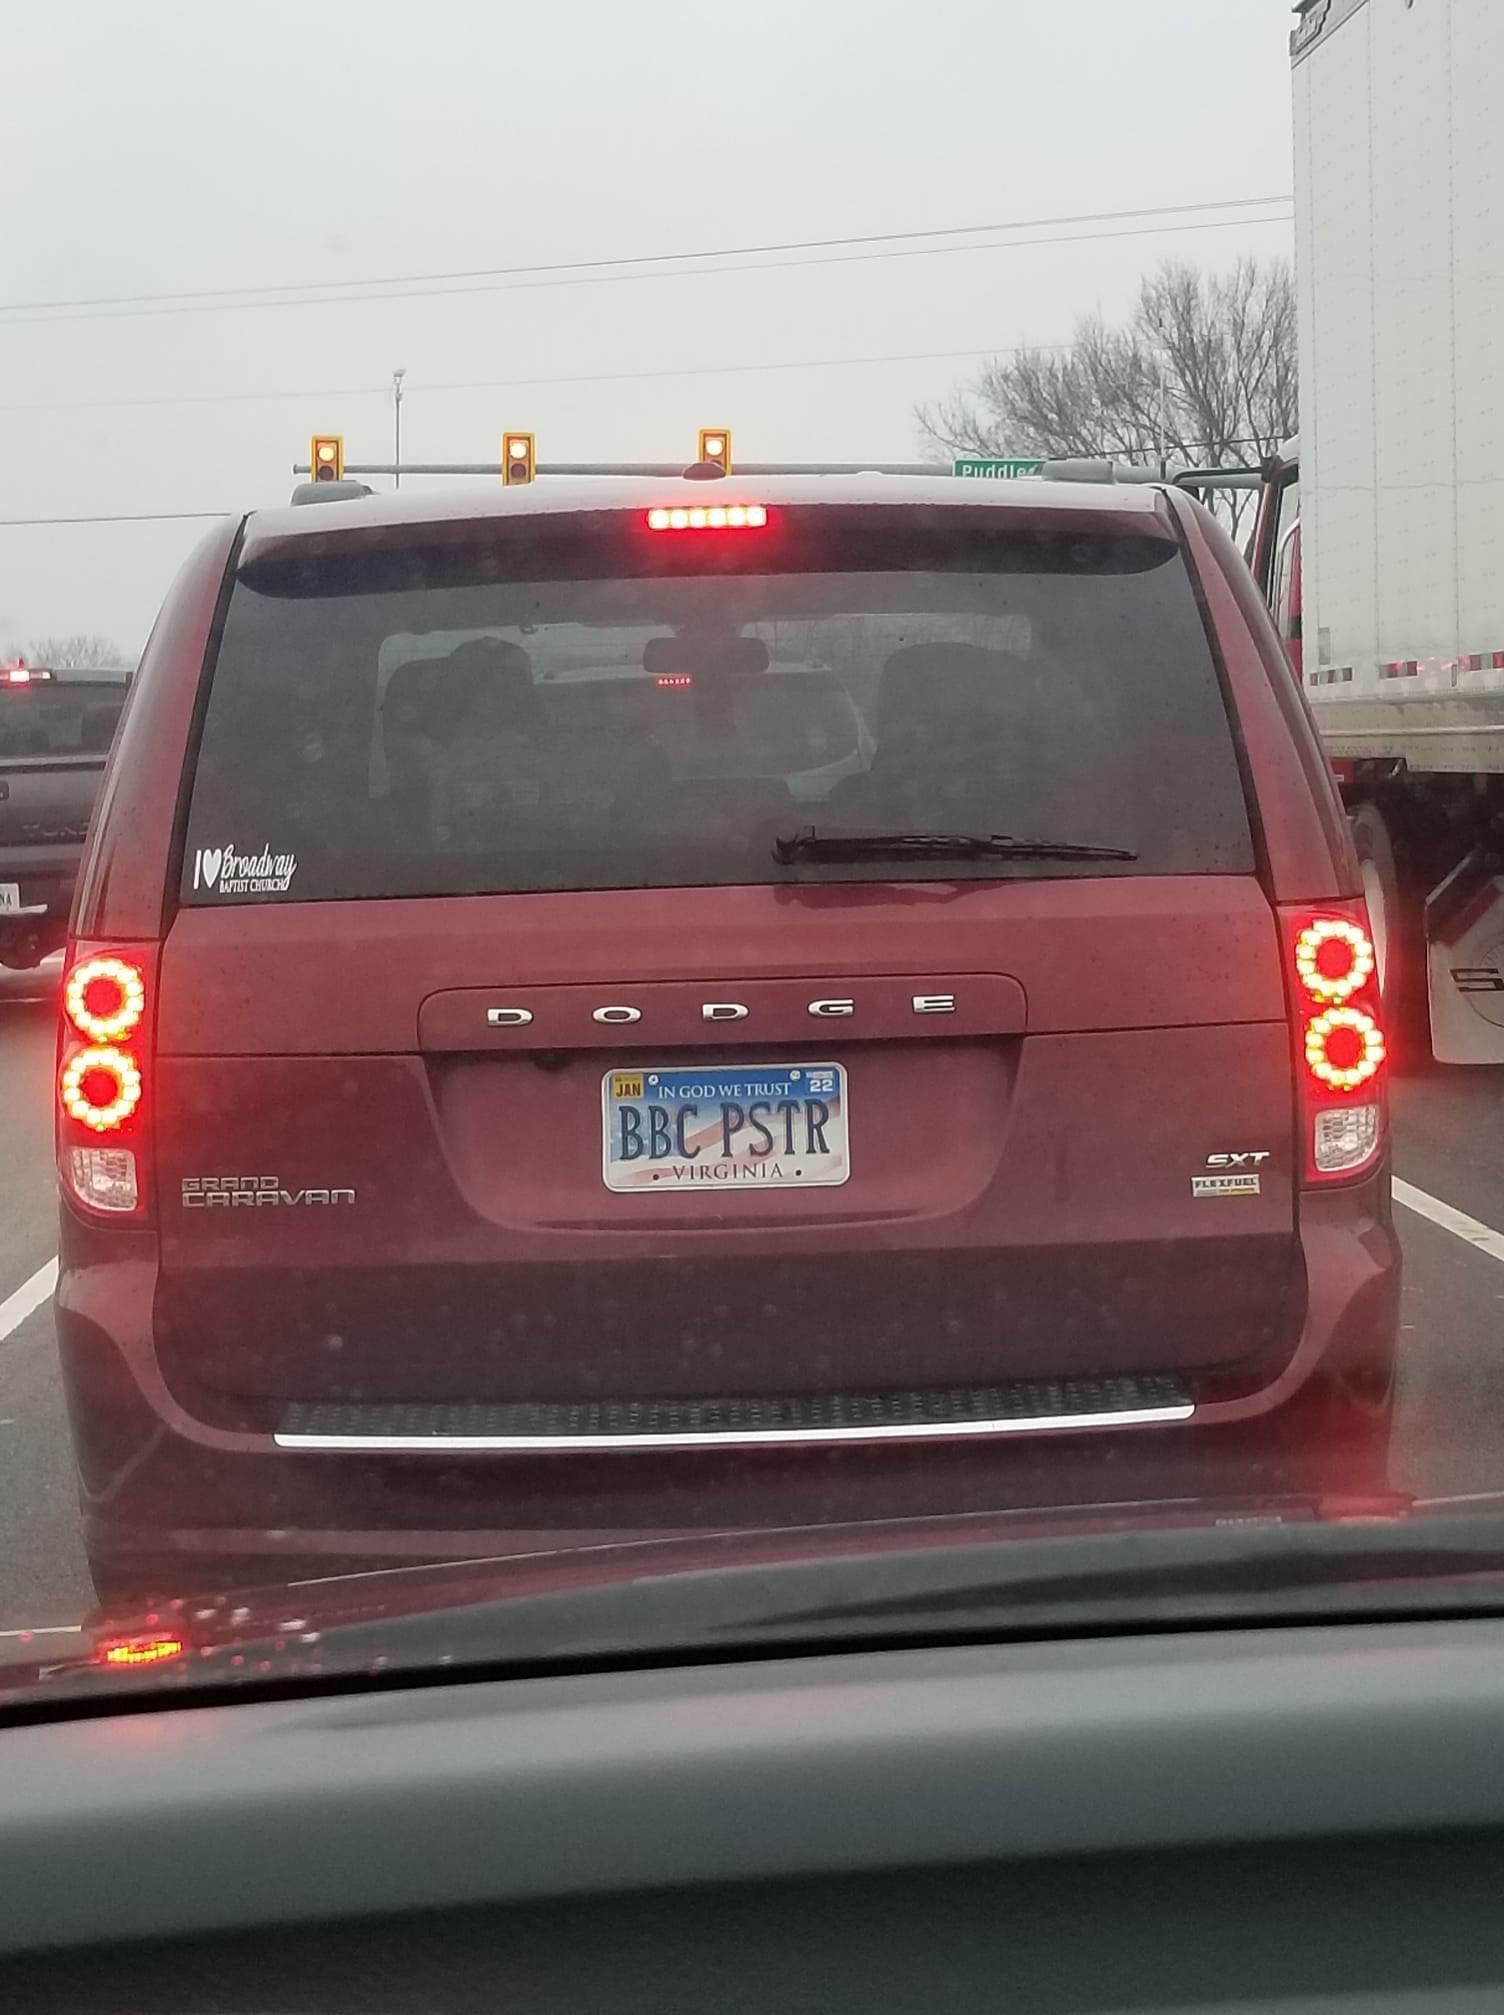 I thought this license plate meant something else, until I saw the sticker on the window.